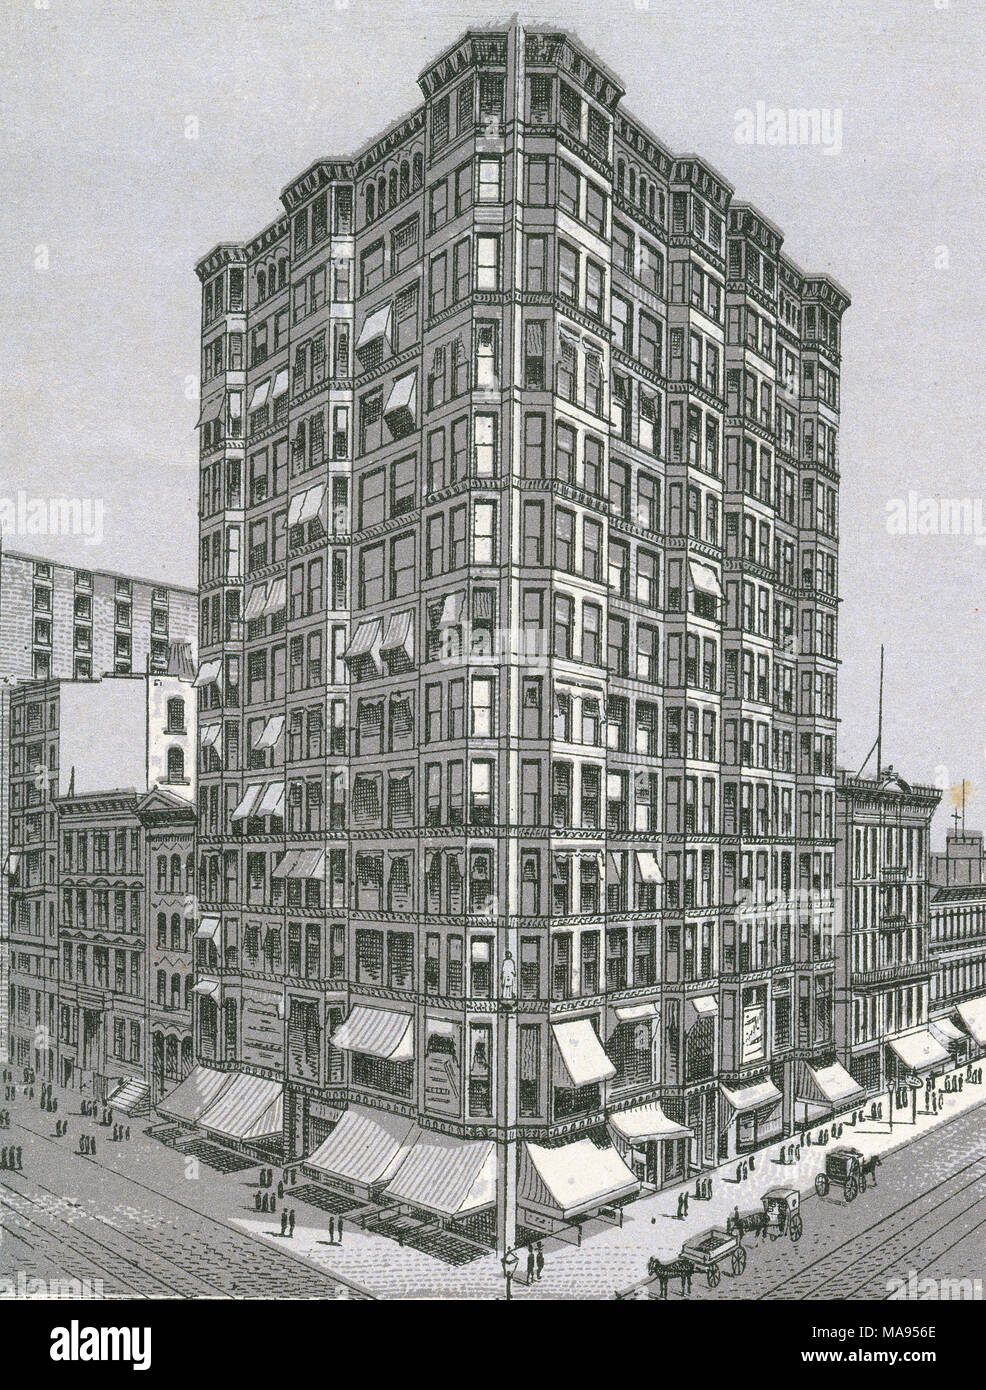 Antique c1890 monochromatic print from a souvenir album, showing Tacoma Block in Chicago, Illinois. The Tacoma Building is an early skyscraper in Chicago. Completed in 1889, it was the first major building designed by the architectural firm Holabird & Roche. Printed with the Glaser/Frey lithographic process, a multi-stone lithographic process developed in Germany. Stock Photo